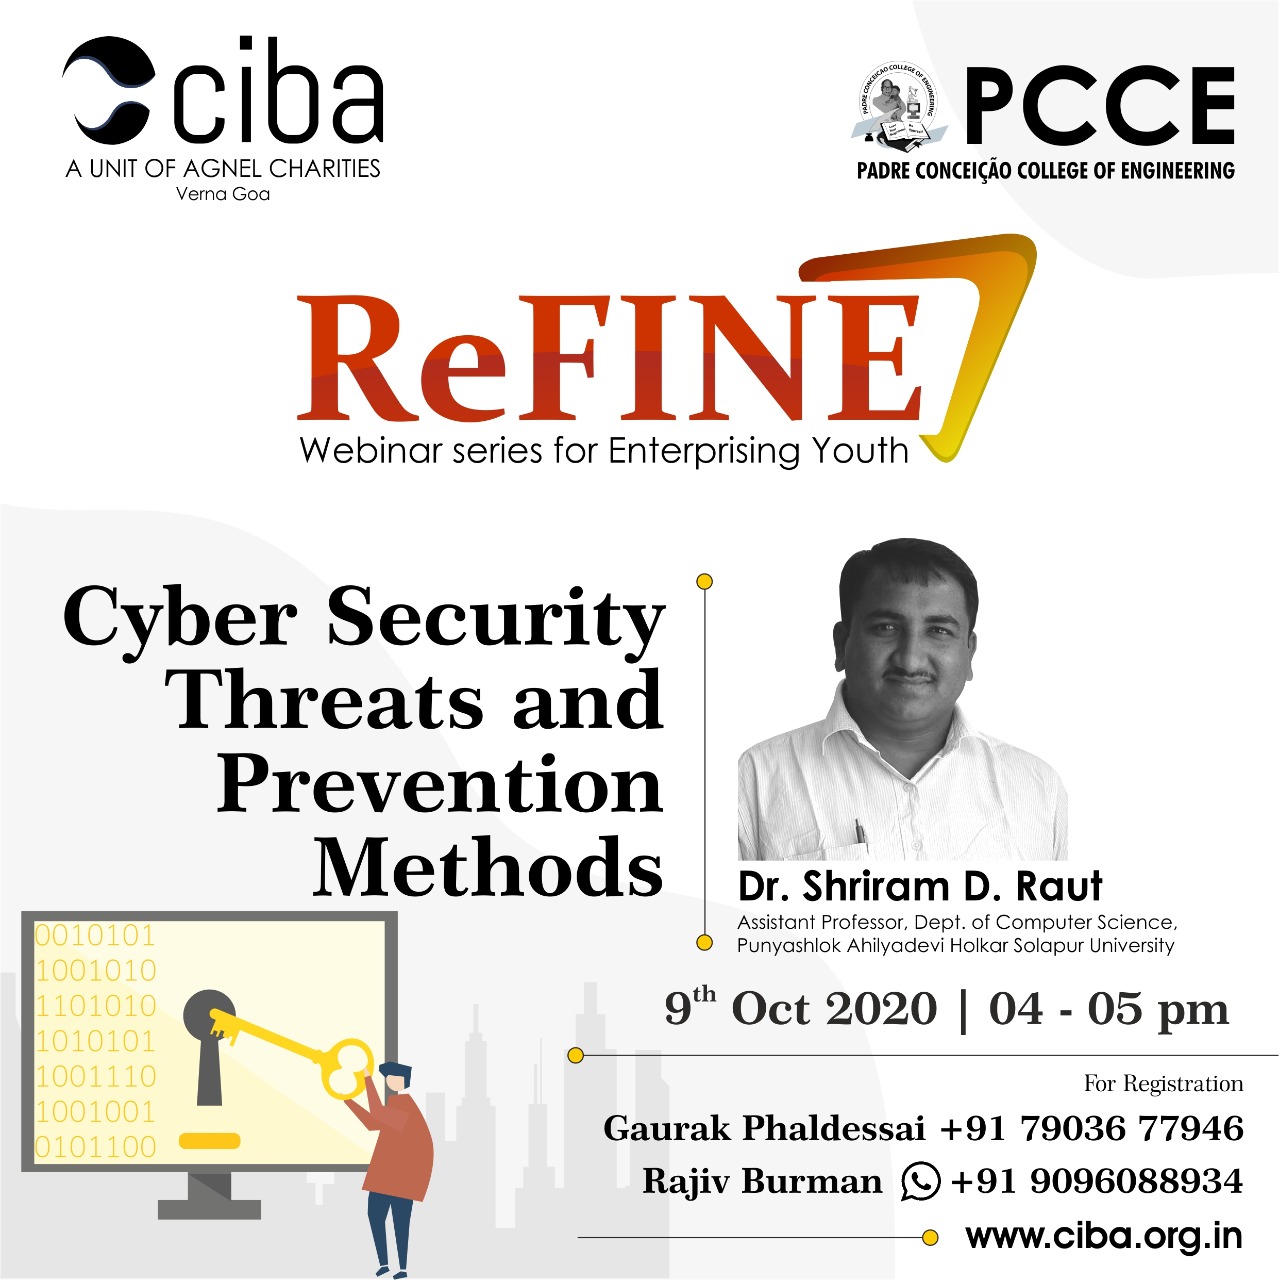 ciba-ReFINE - Cyber Security Threats and Prevention Methods